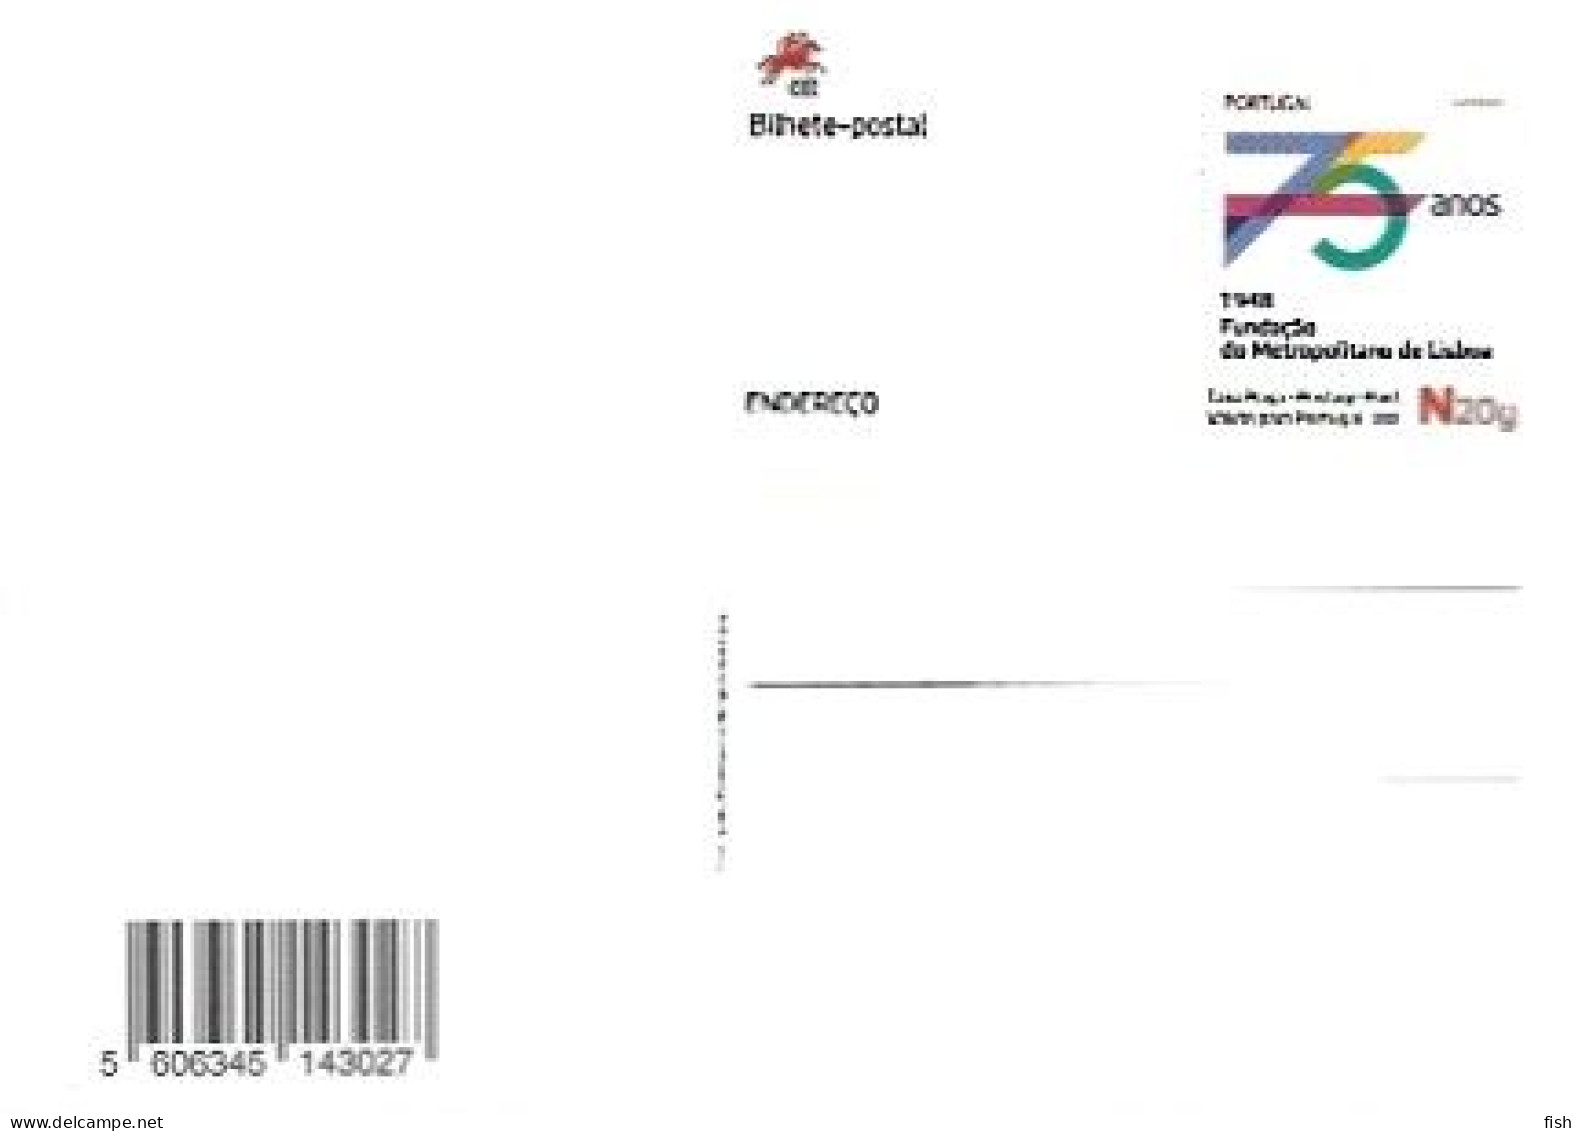 Portugal ** & Postal Stationery, 75 Years Of The Foundation Of The Metropolitan Of Lisbon 1948-2023 (799799) - Inwijdingen